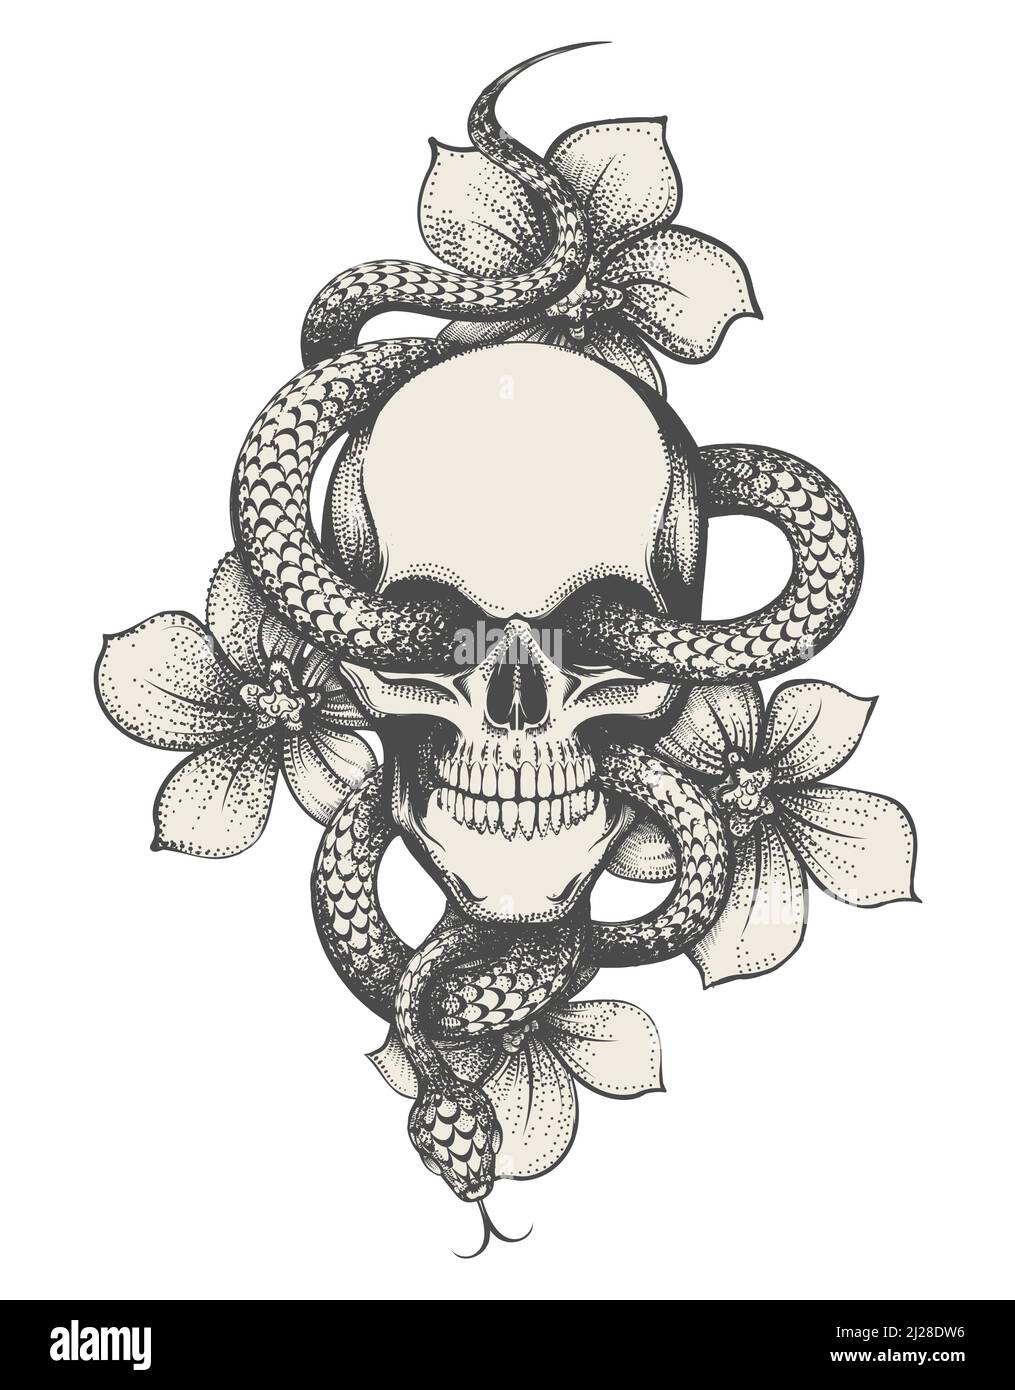 Tattoo of human skull with snake and flowers isolated on white. Vector illustration. Stock Vector